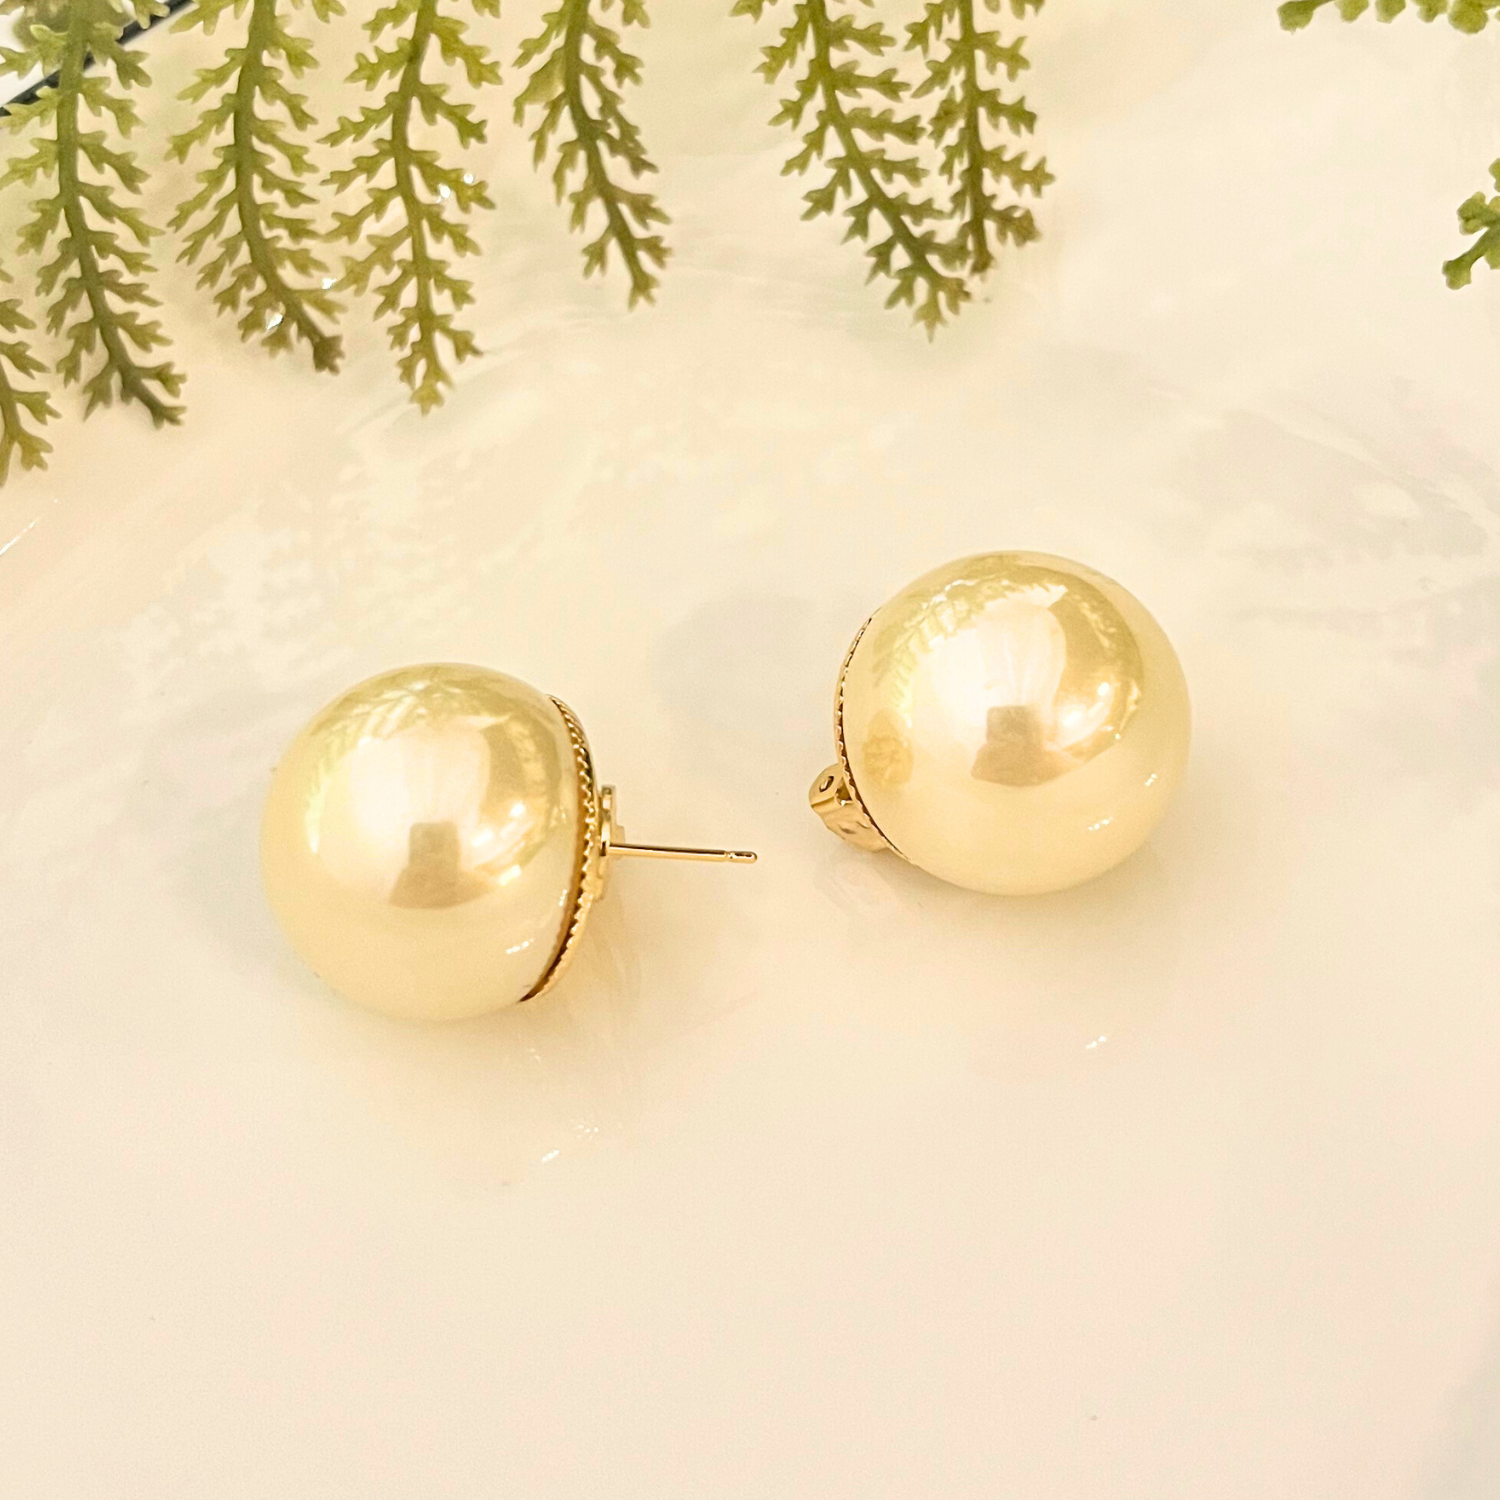 25mm Pearl Studs With Clip- White